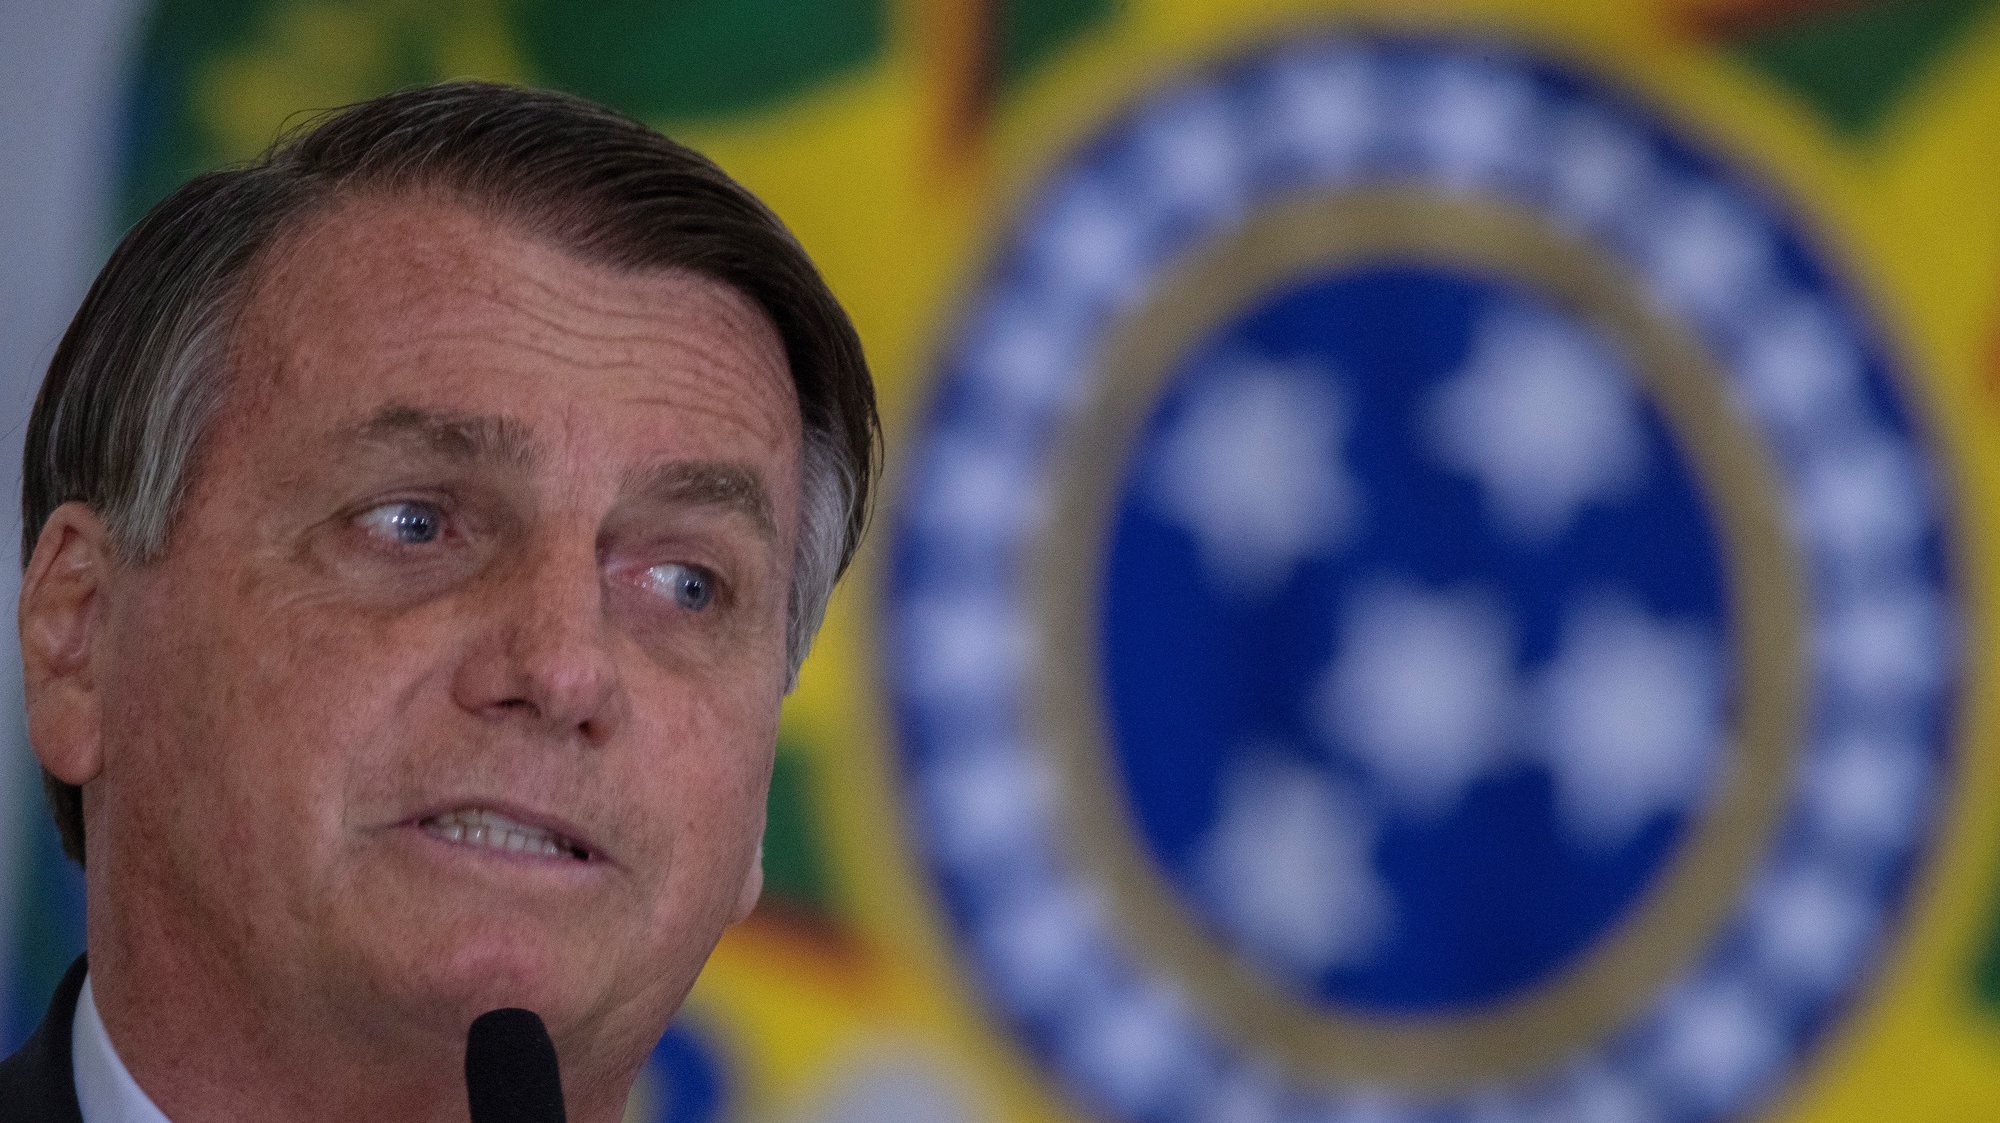 epa09469929 The President of Brazil, Jair Bolsonaro, participates in the Call for Progress in the &#039;Casa Verde e Amarela&#039; Program, at the Palacio do Planalto, in the city of Brasilia, Brazil, 15 September 2021. Bolsonaro reiterated this 15 September that the &#039;ancestral right&#039; that the indigenous people claim over the lands could lead to &#039;losing a Germany and a Spain together&#039; and cause &#039;a catastrophe&#039; to the country&#039;s agriculture. The president insisted on the matter on the eve of the Supreme Court continuing a trial in which it must rule in relation to the so-called &#039;time frame&#039;, which only recognizes as indigenous land that which the native peoples occupied on 05 October 1988, when the current Brazilian Constitution was promulgated.  EPA/Joedson Alves